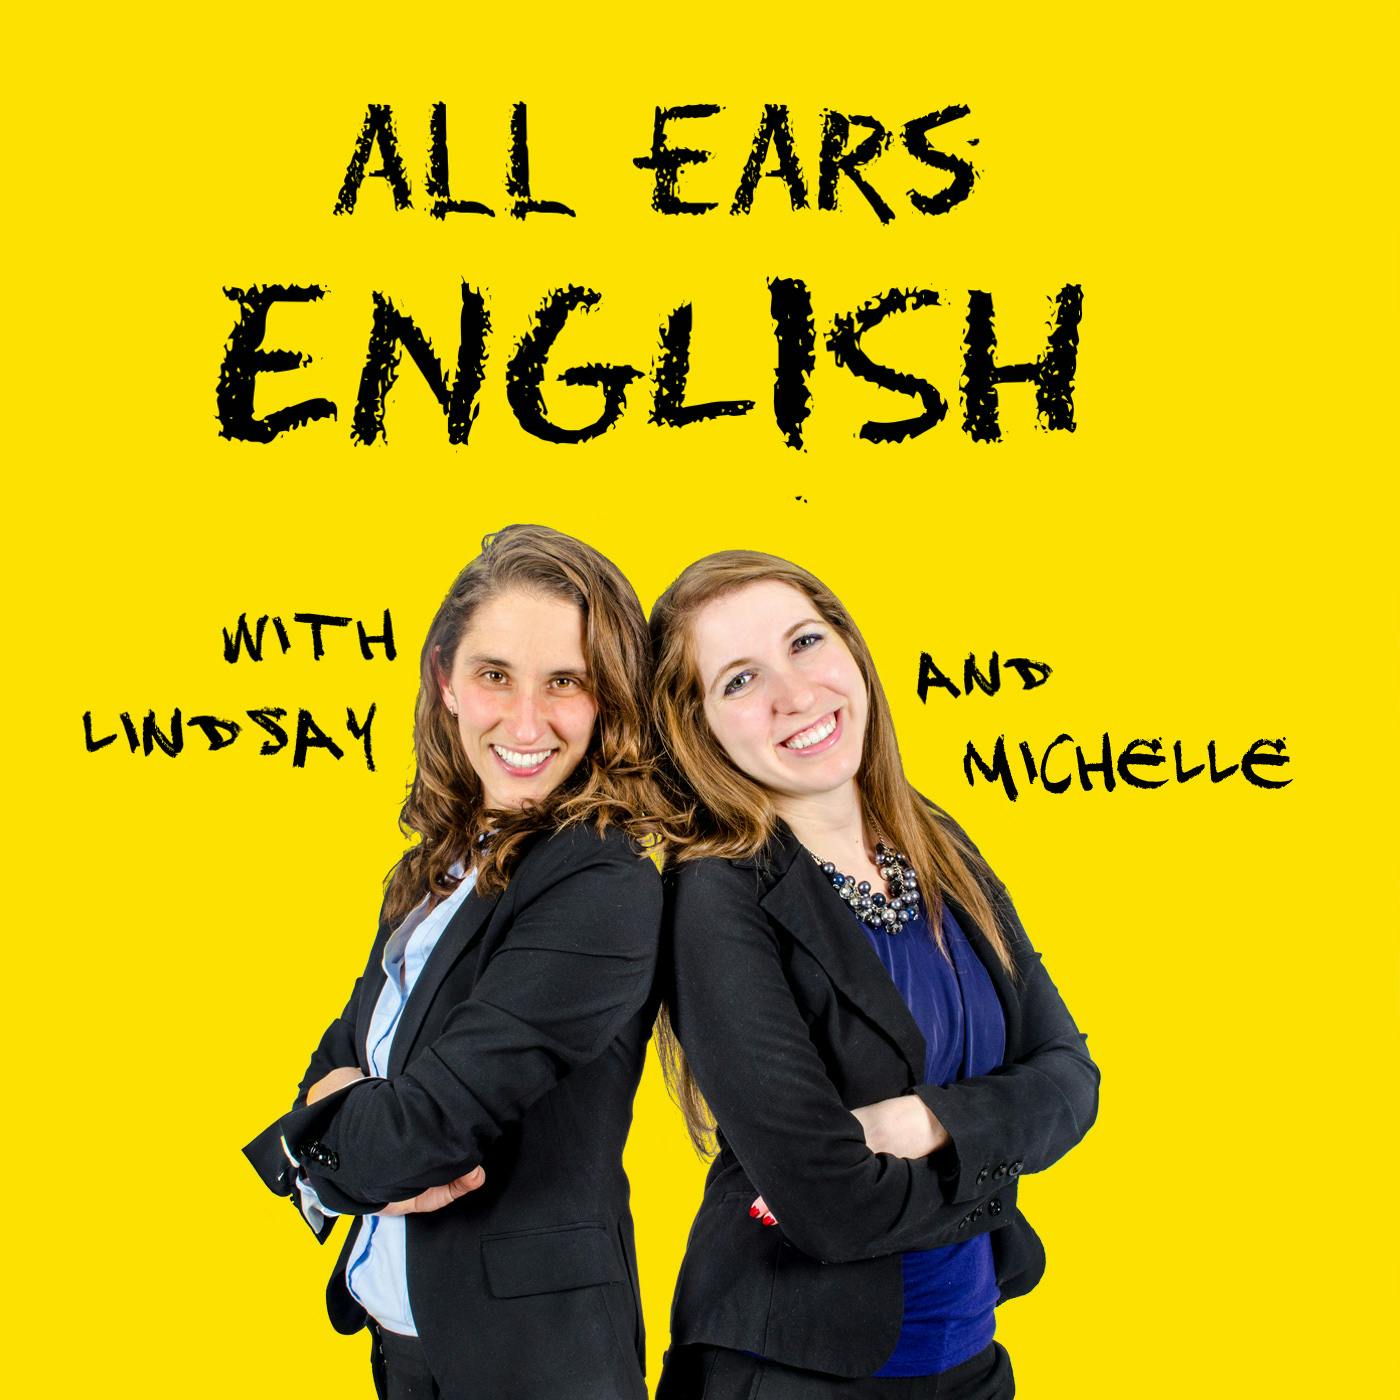 AEE 1581: Four English Expressions to Share the Essence of Something